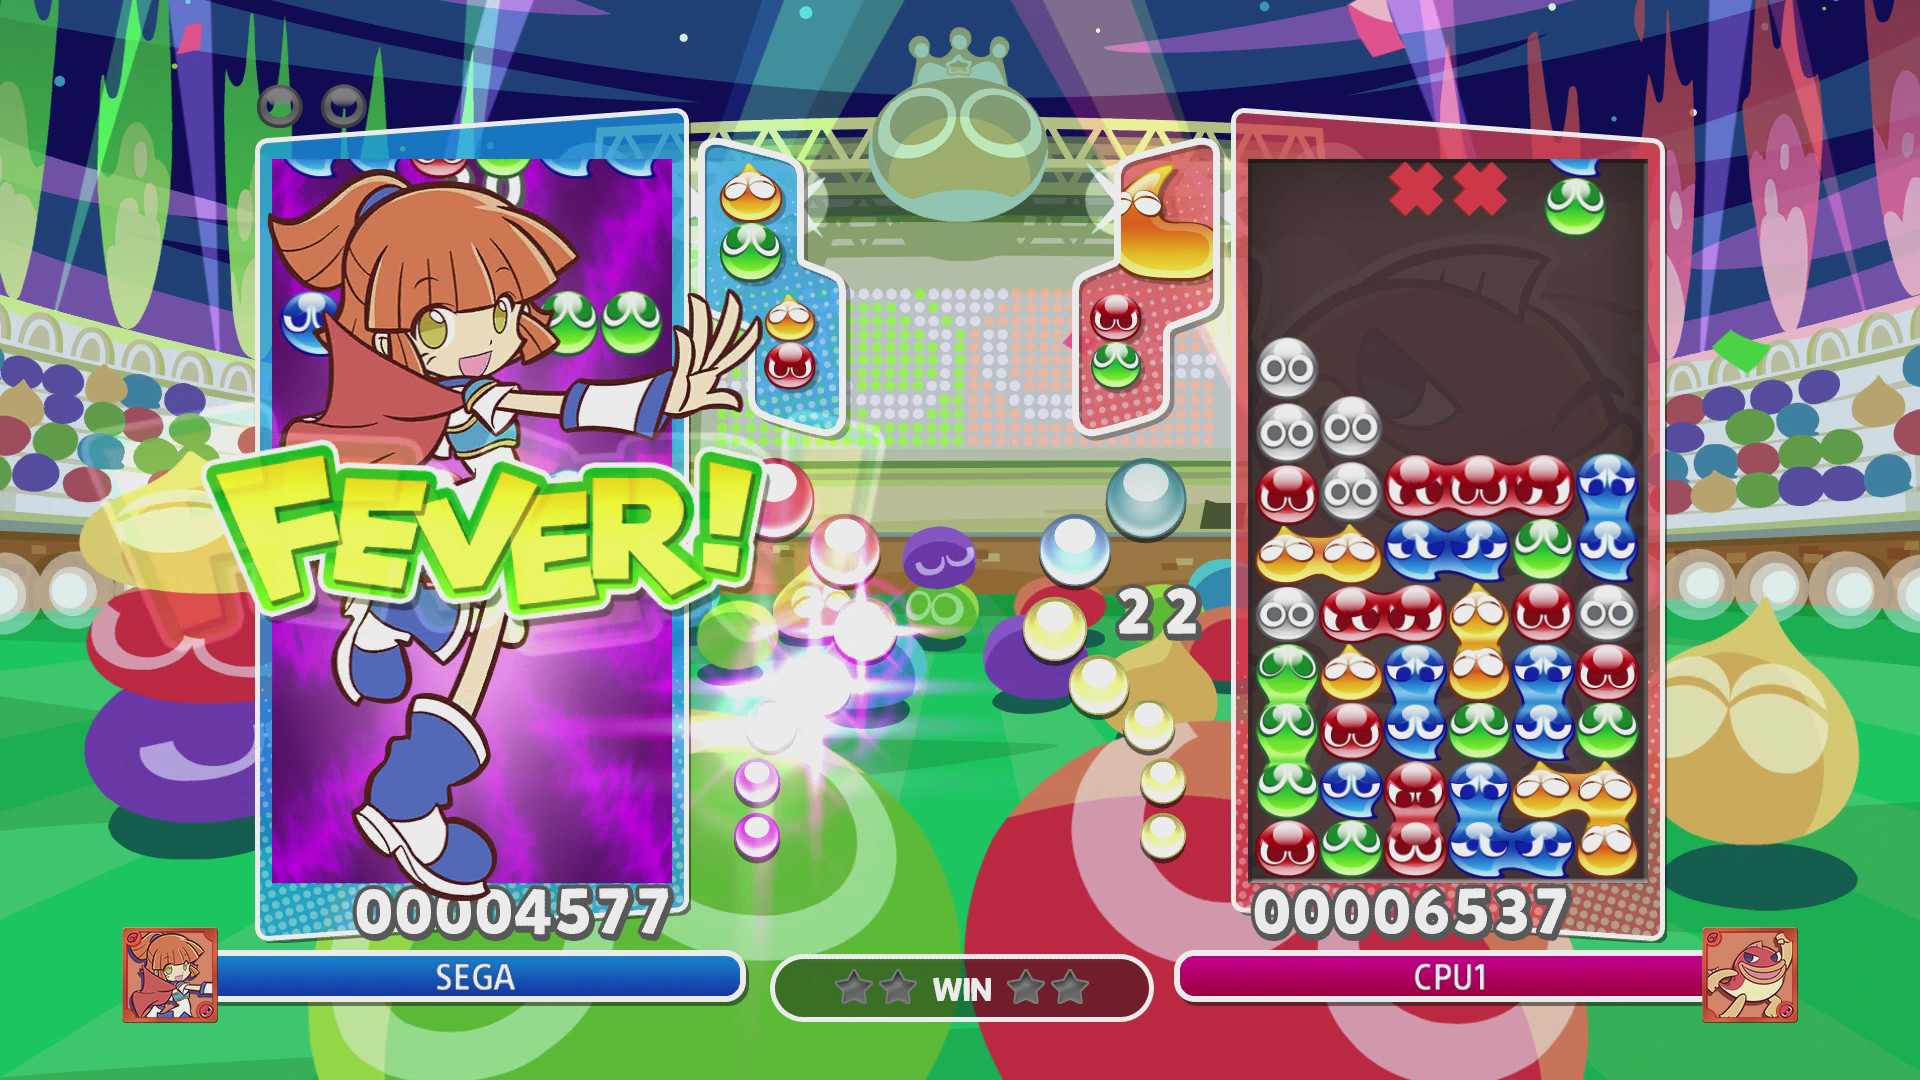 Find the best laptops for Puyo Puyo Champions